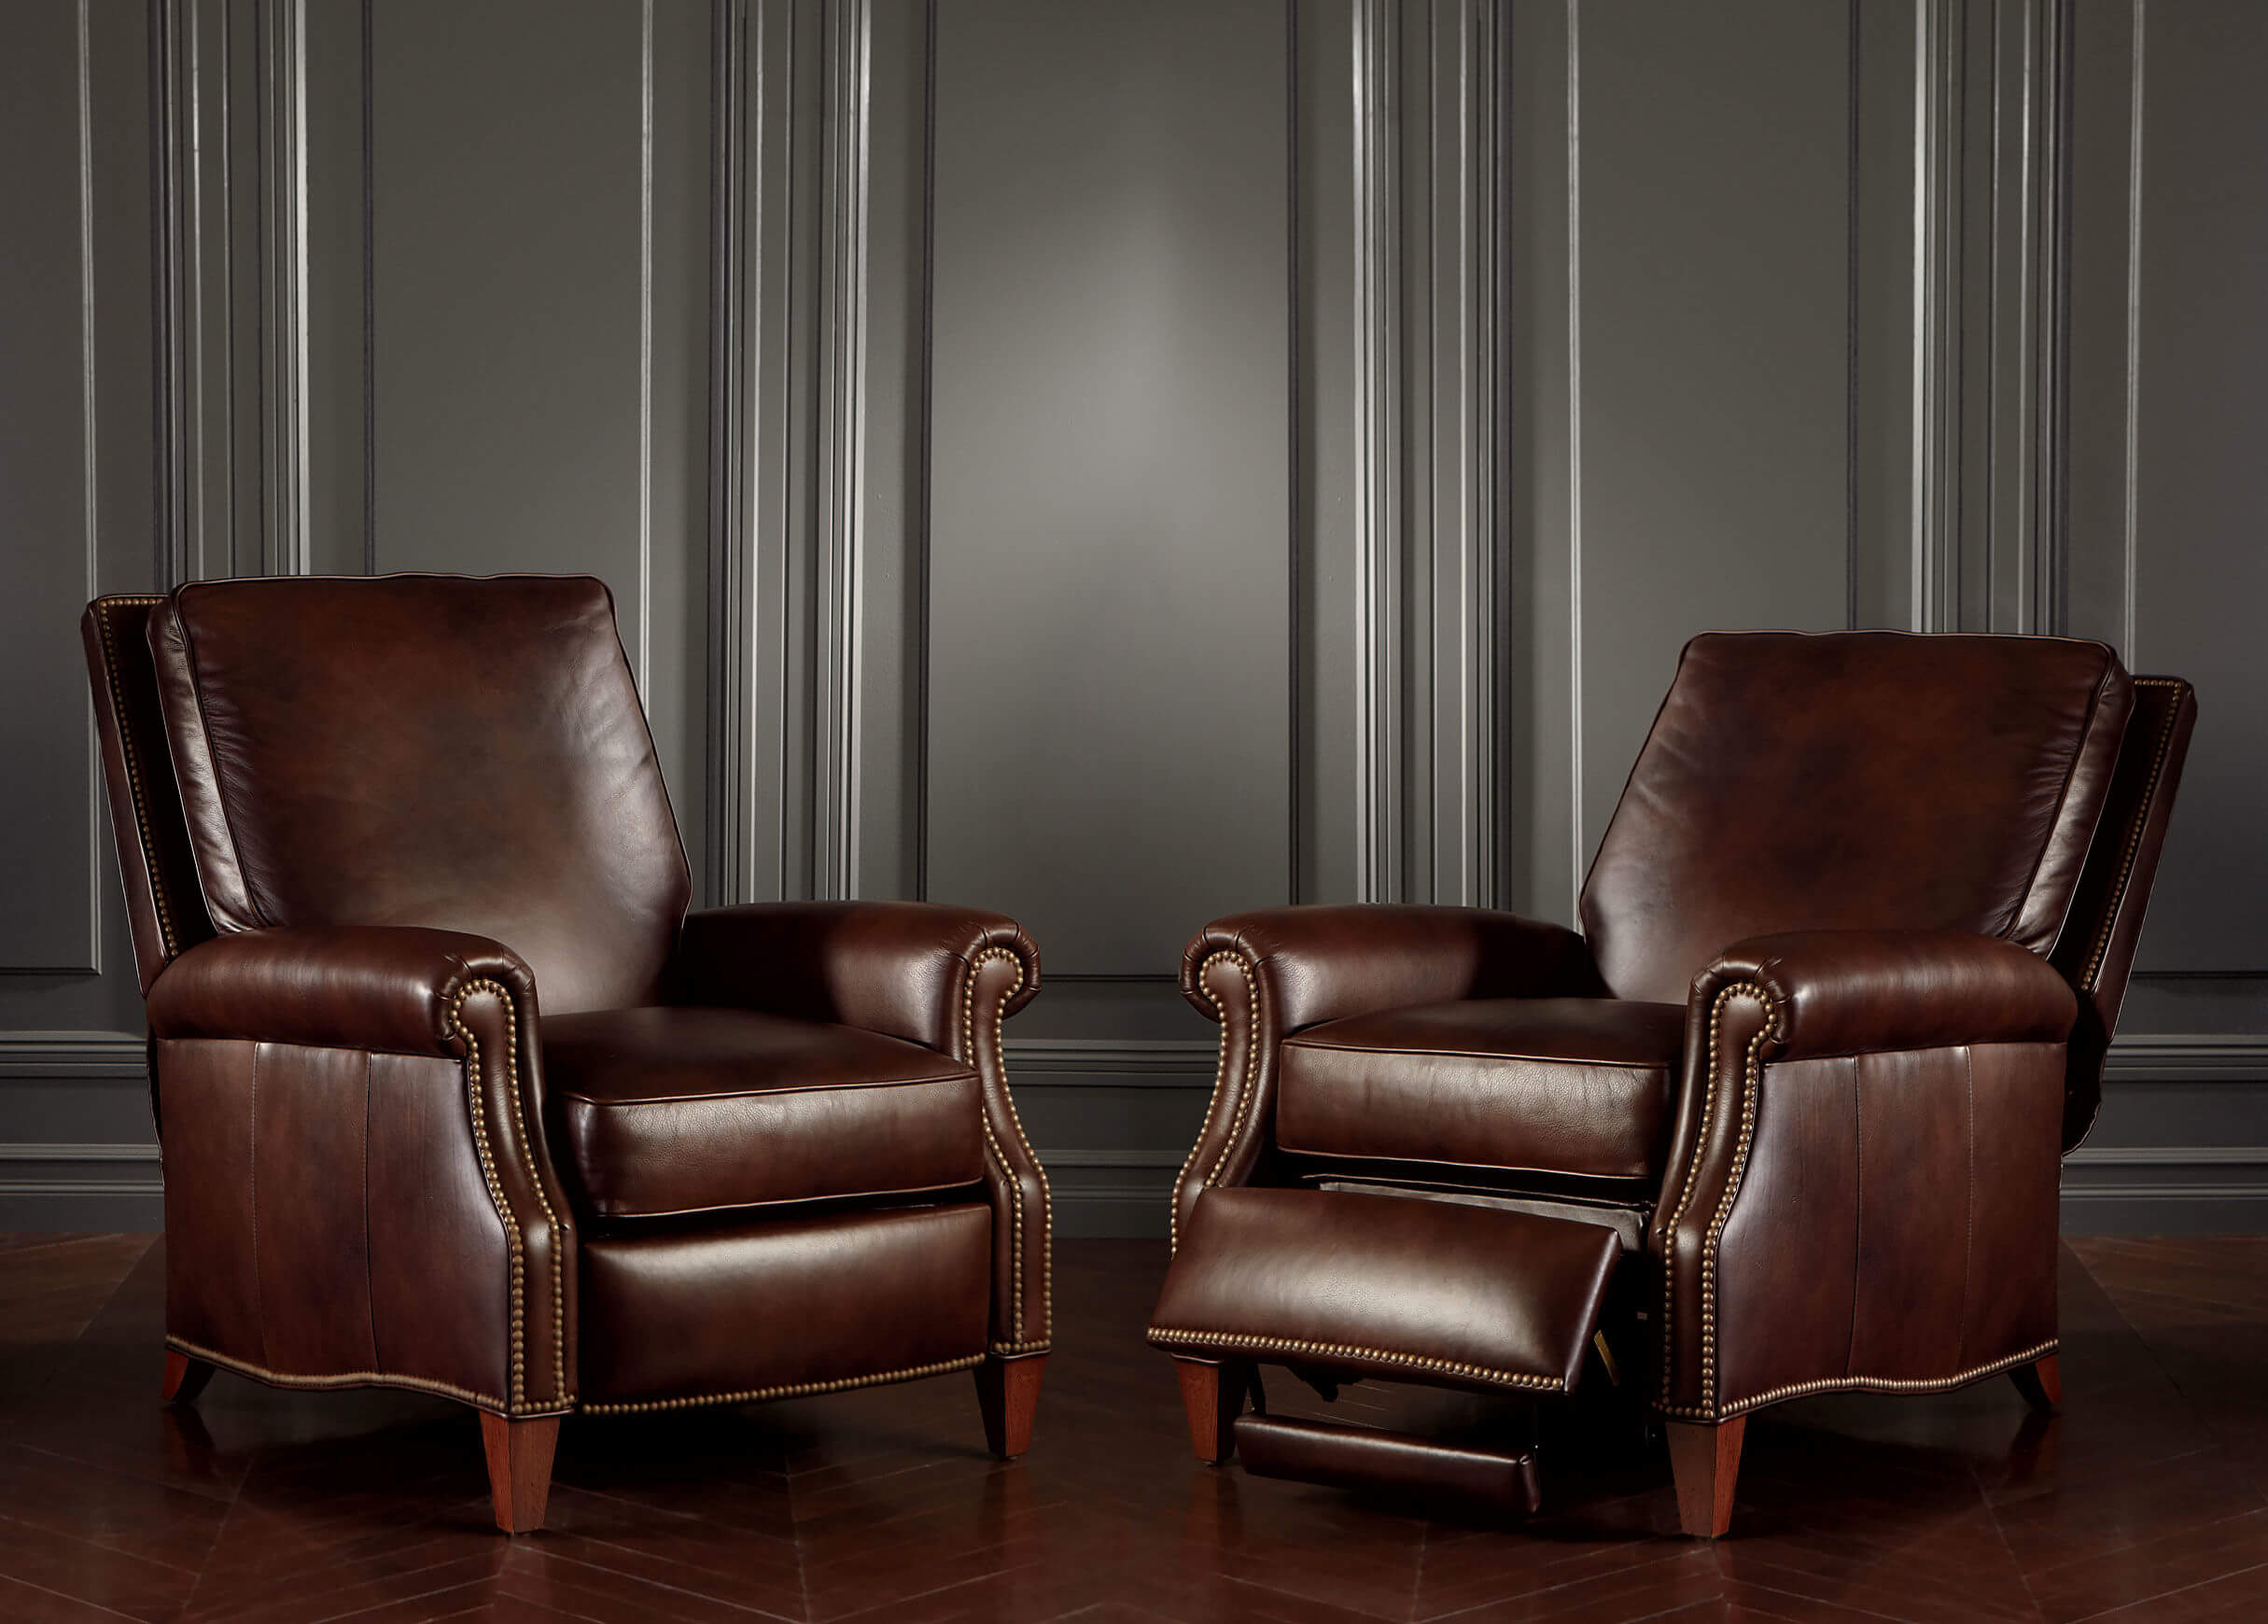 Luxury Leather Arm Chair Recliners, Recliner Chairs Leather